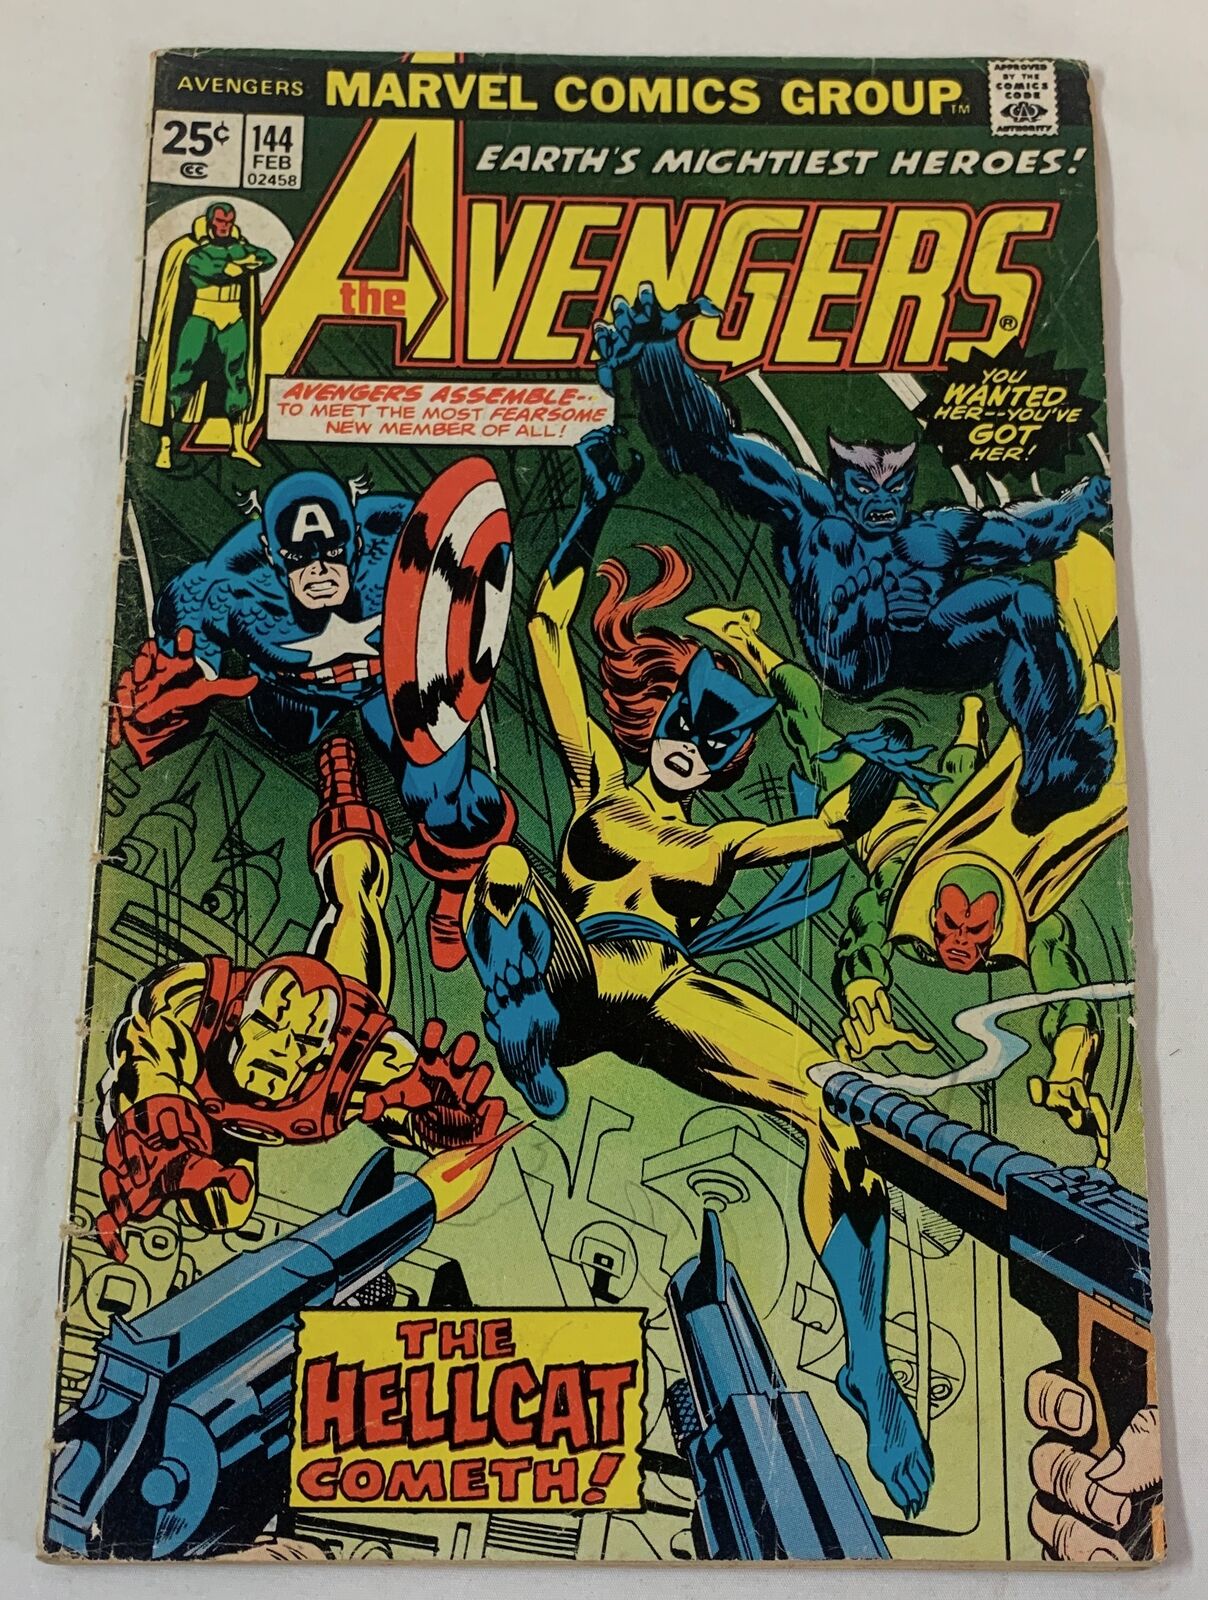 1976 Marvel AVENGERS #144 ~ low grade, tracing on cover ~ Hellcat